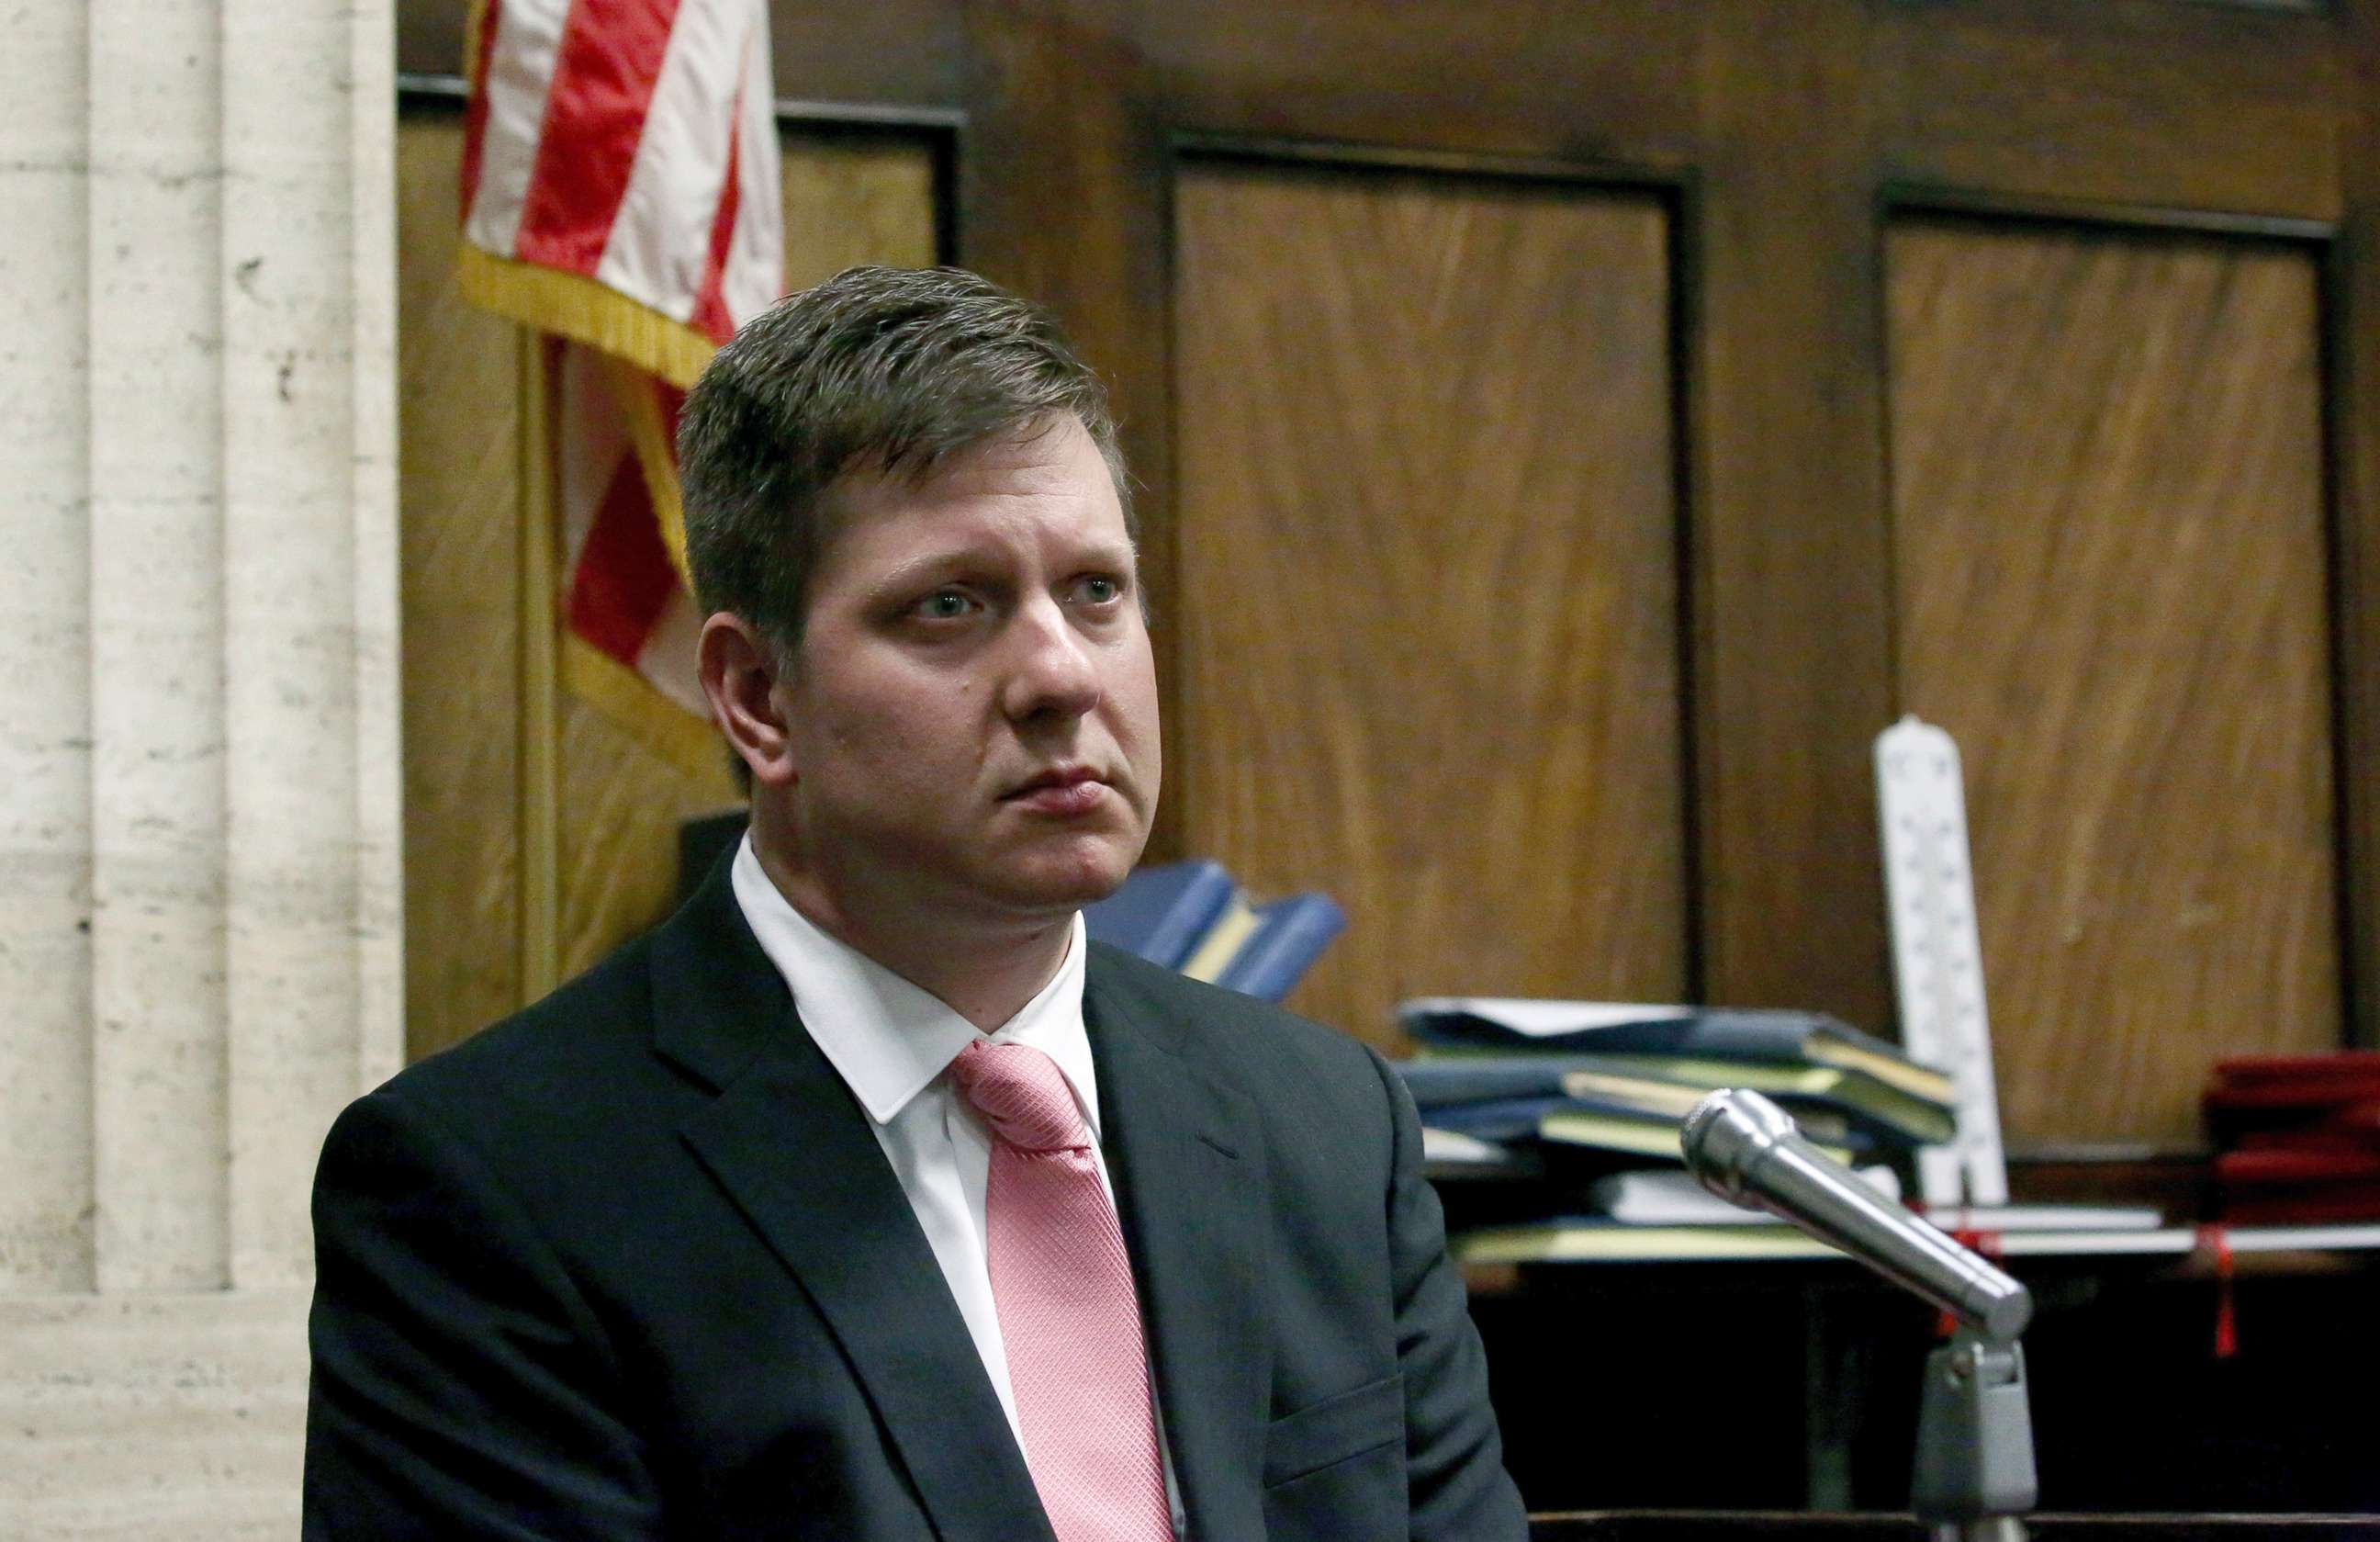 PHOTO: Chicago police Officer Jason Van Dyke takes the witness stand during a hearing, June 28, 2017, at the Leighton Criminal Courts Building in Chicago.